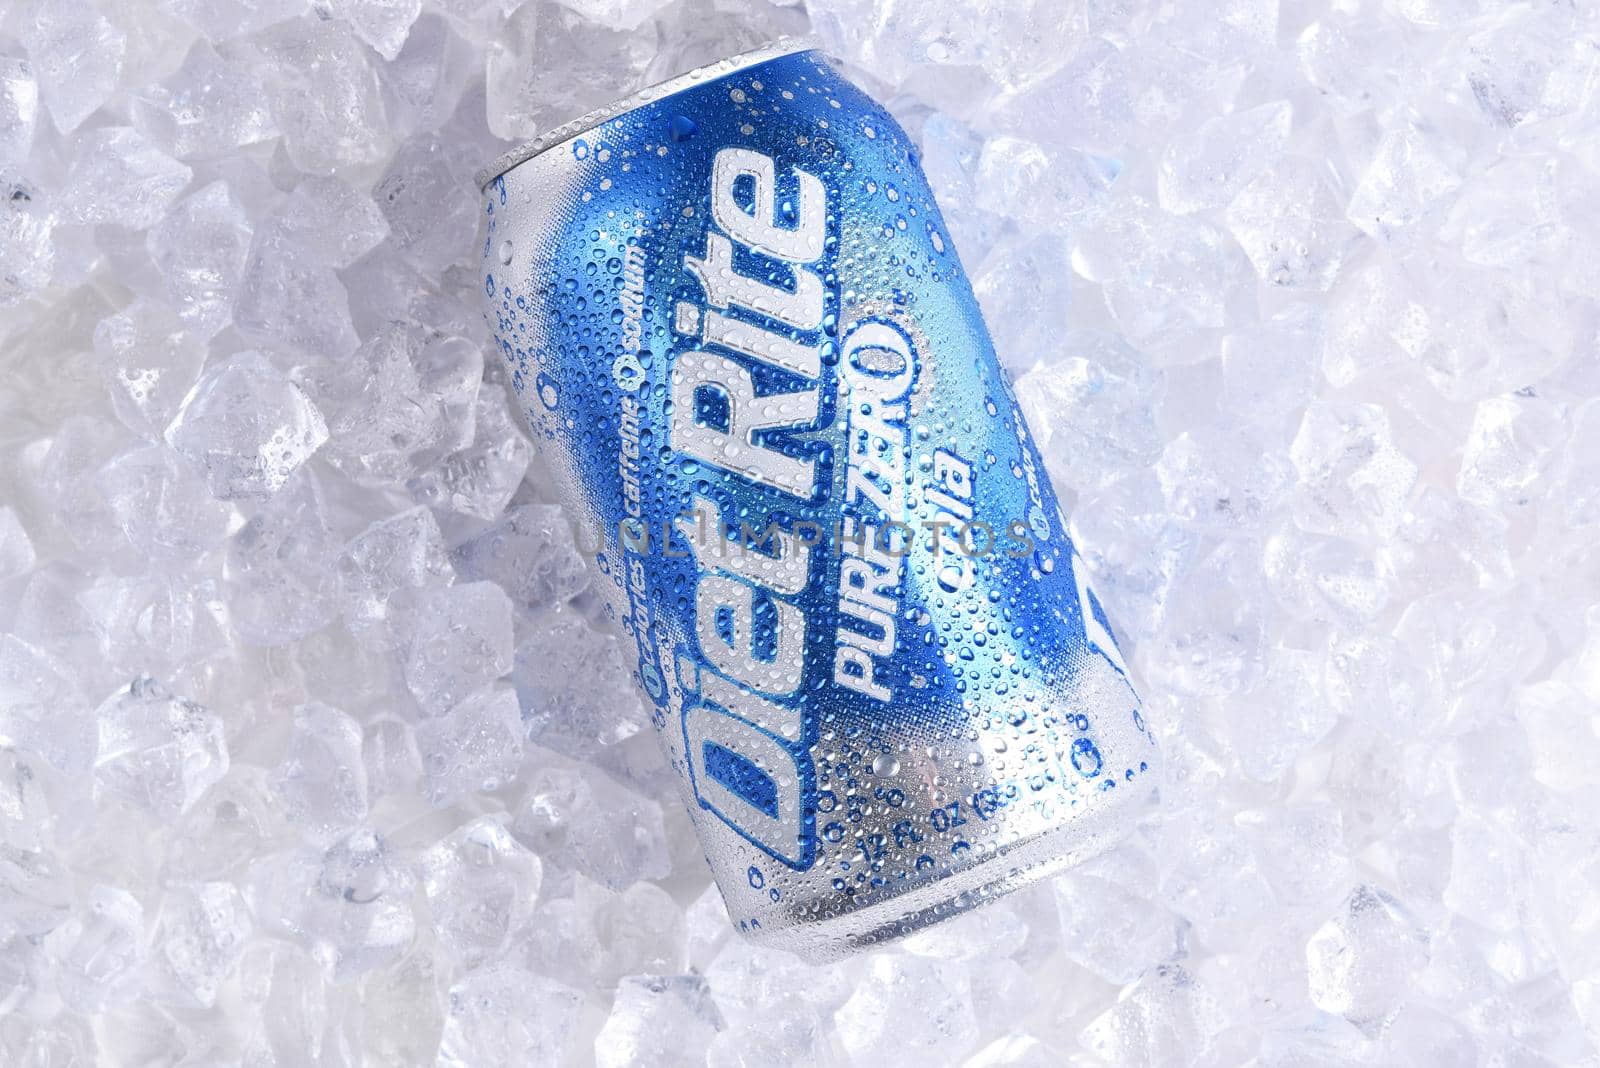 A can of Diet Rite Pure Zero Cola on ice. Diet Rite is a brand of no-calorie soft drinks originally distributed by the RC Cola company by sCukrov